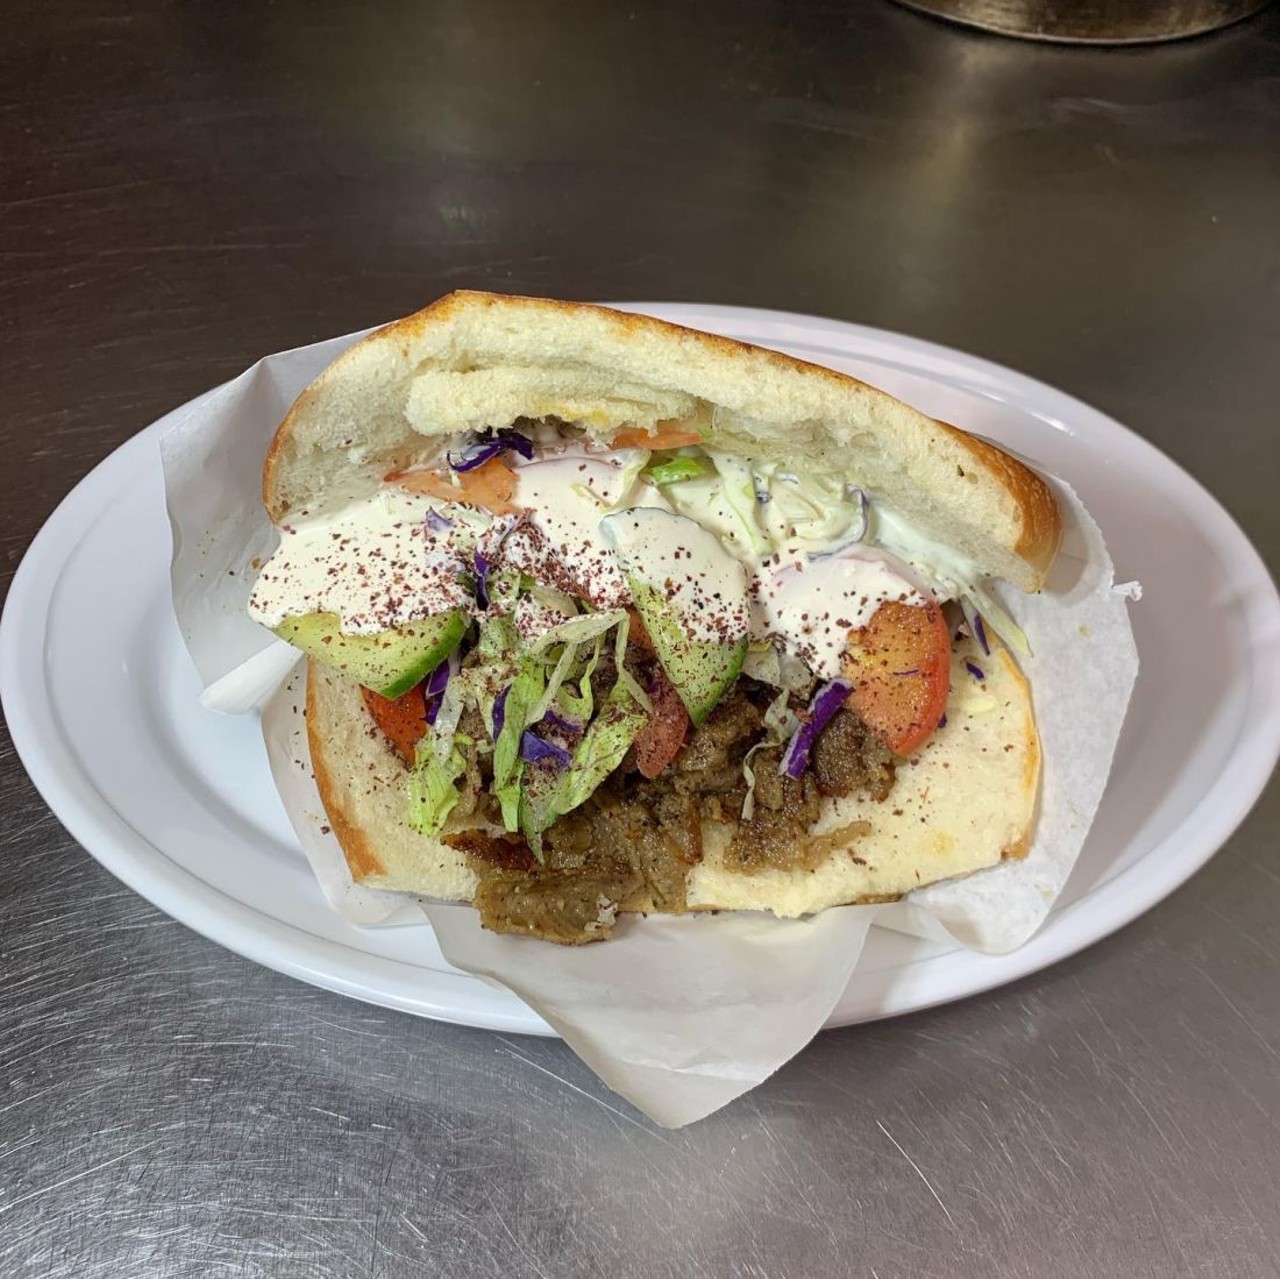 Balkan House
1314 W Nine Mile Rd., Ferndale; 248-268-4920
The Hamtramck favorite has opened up another location in Ferndale.  Make sure to stop in and try everyone's favorite d&ouml;ner kebab. 
Photo via Balkan House Ferndale / Facebook